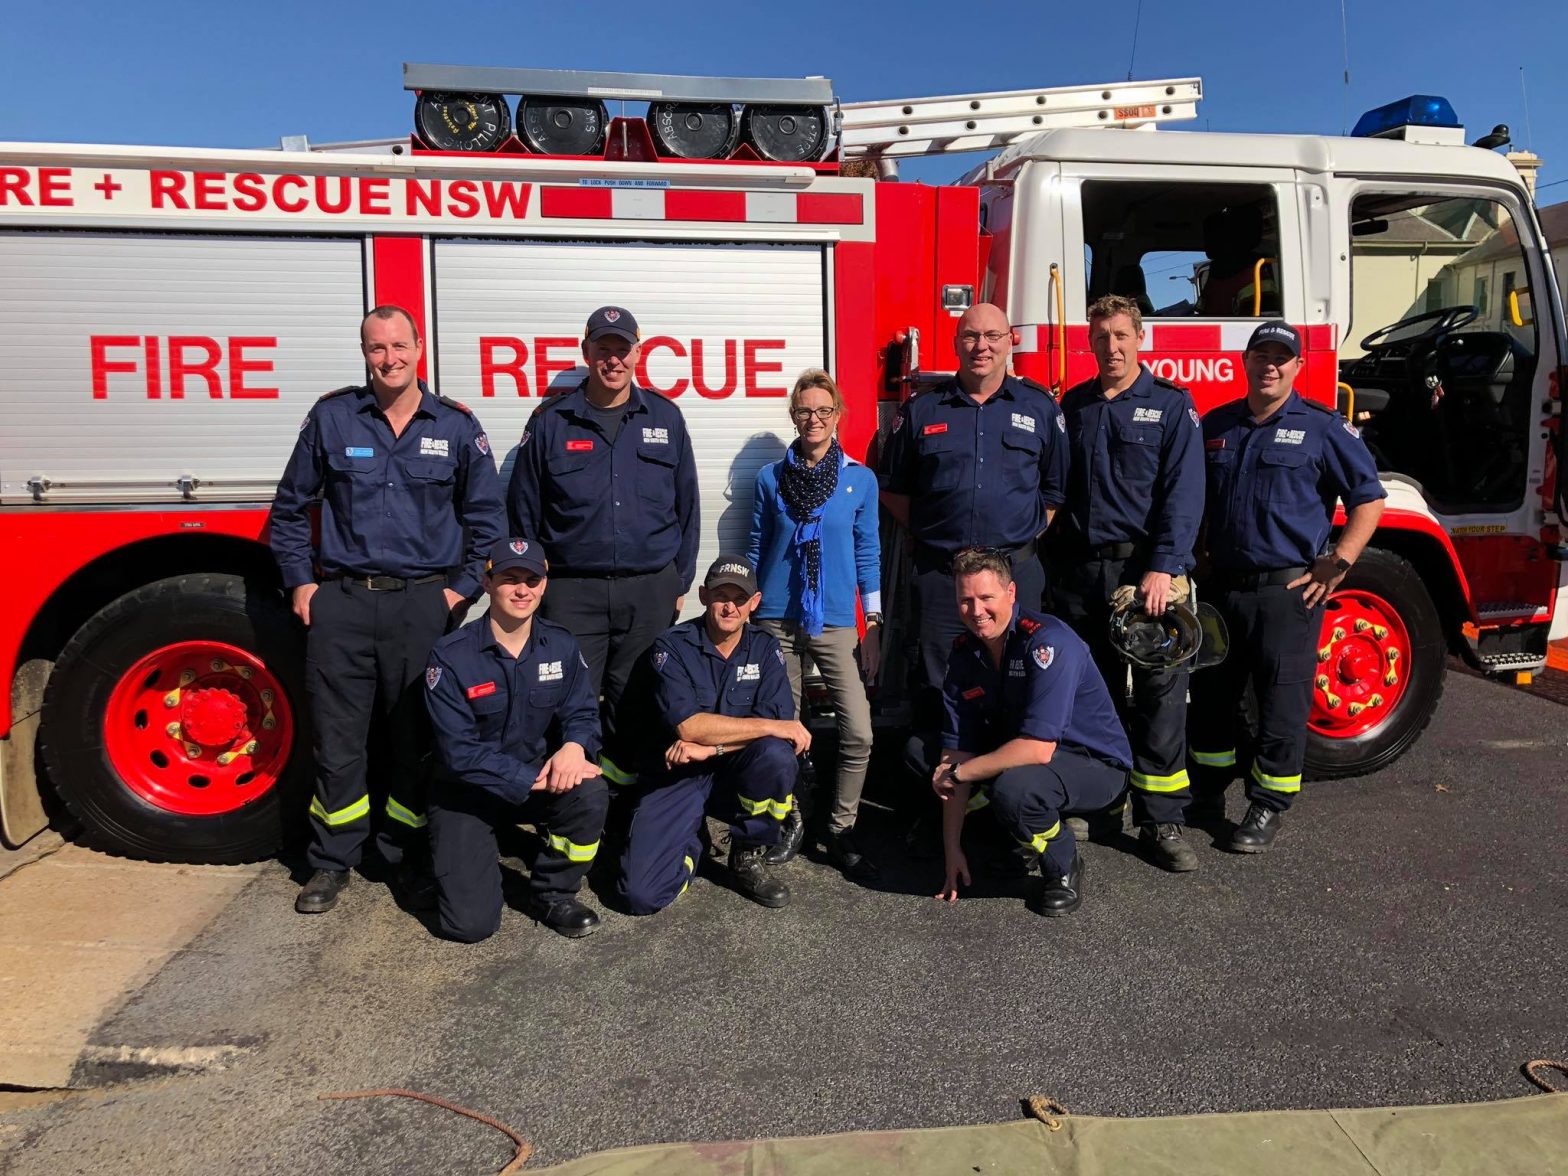 Member for Cootamundra Steph Cooke with members of the Young Fire and Rescue NSW team.